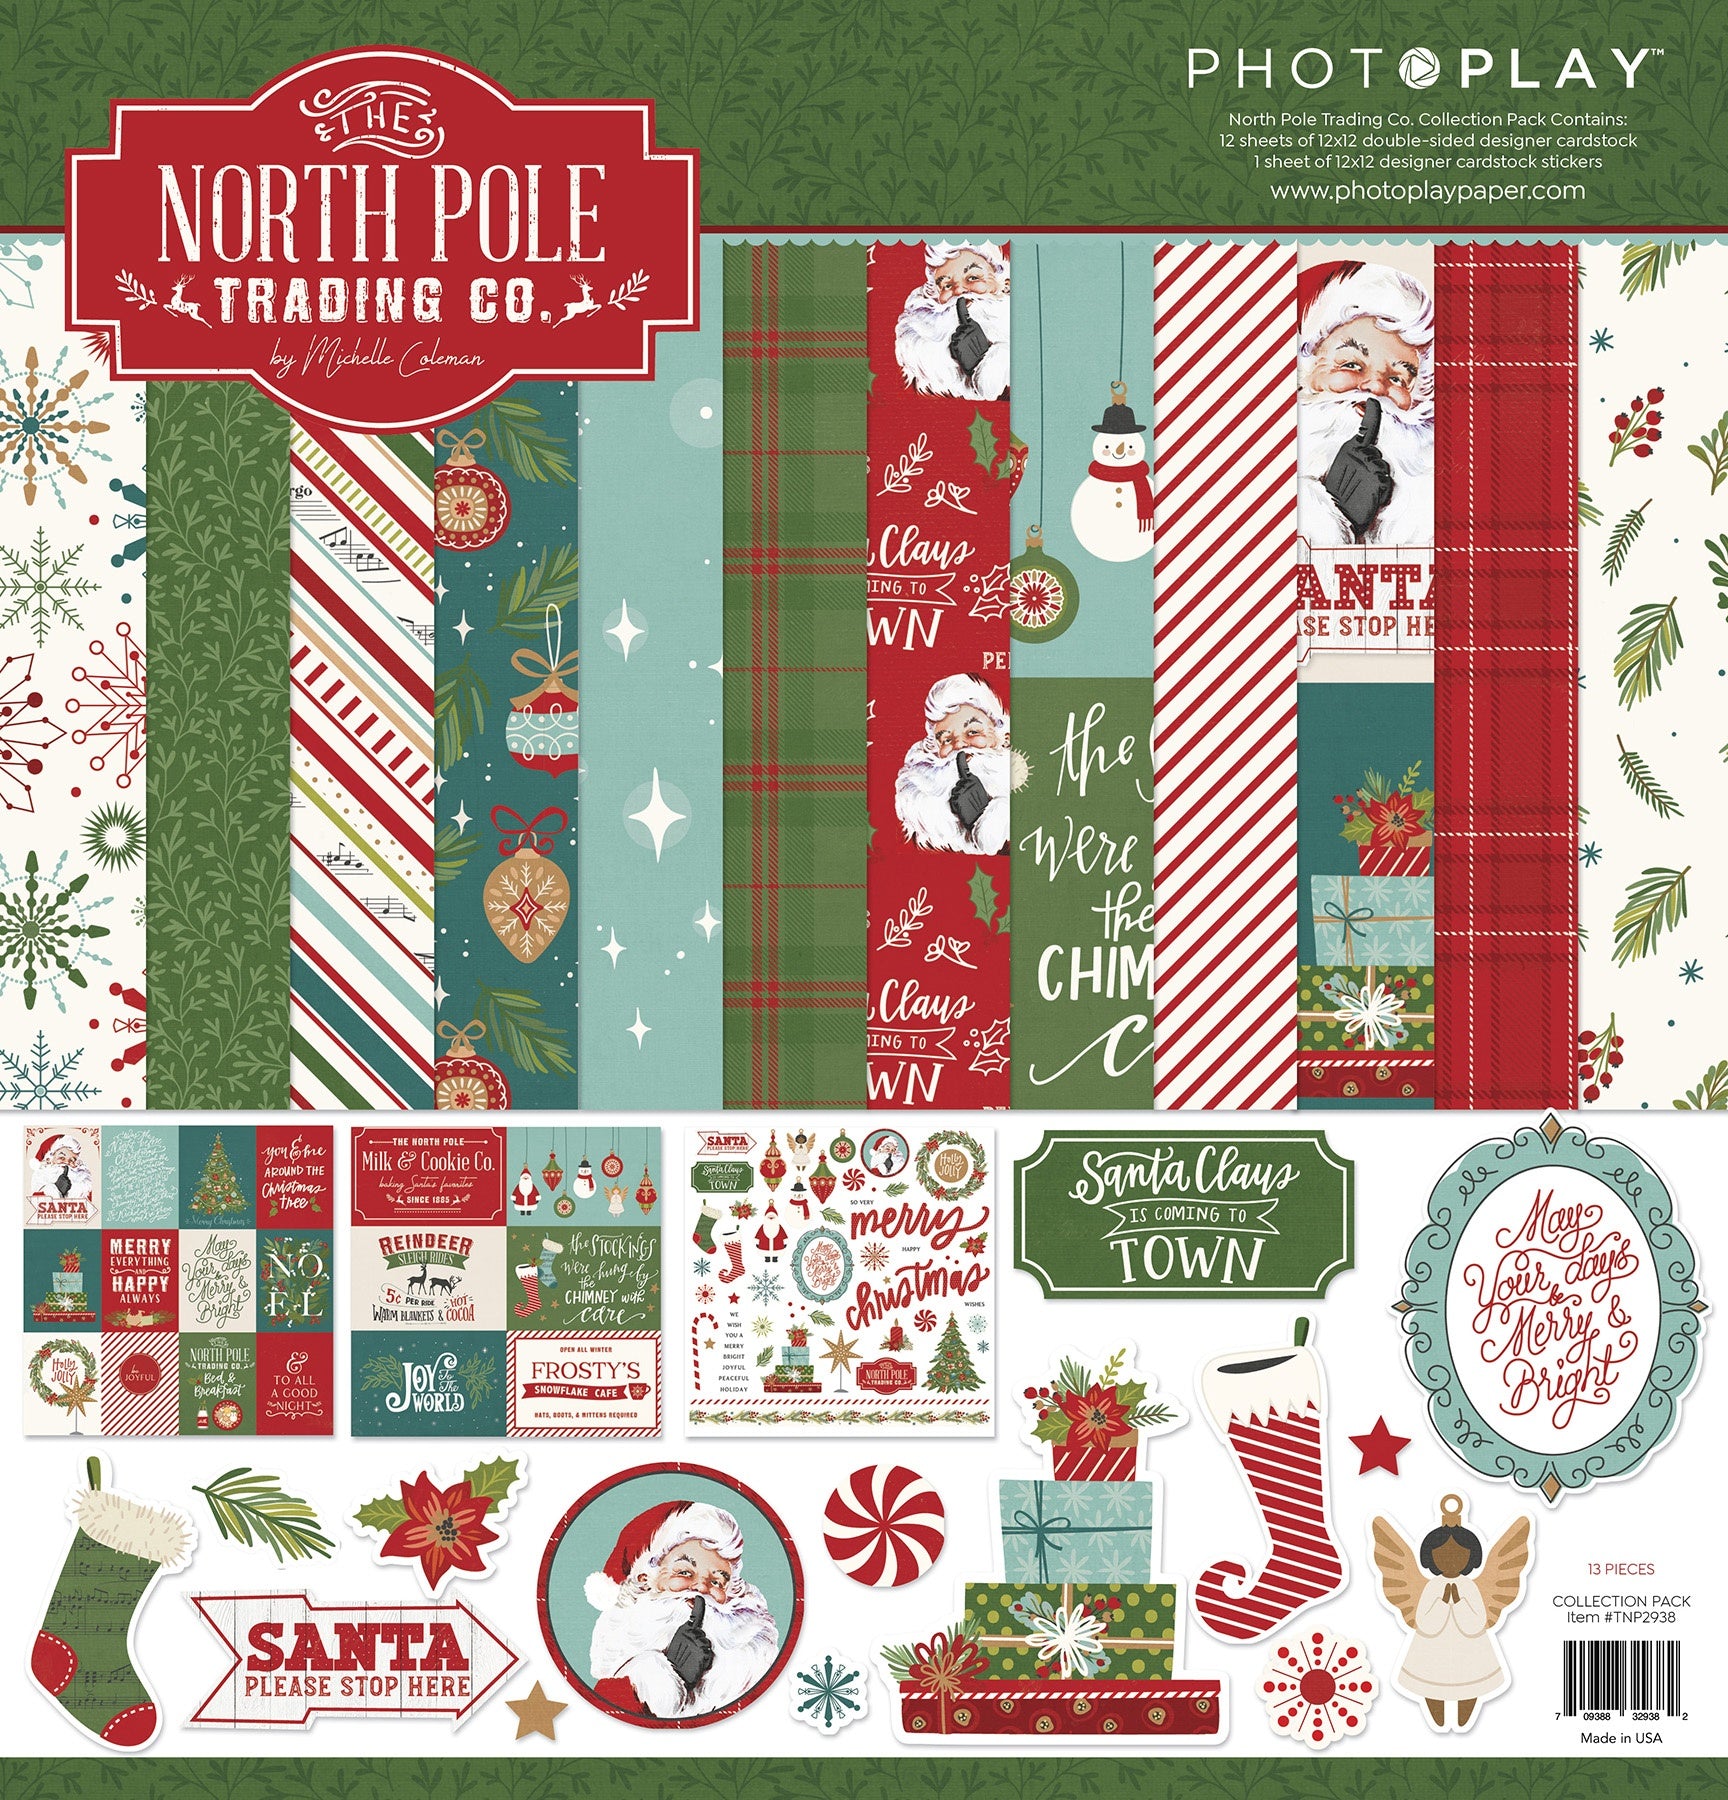 The North Pole Trading Co. Collection Pack